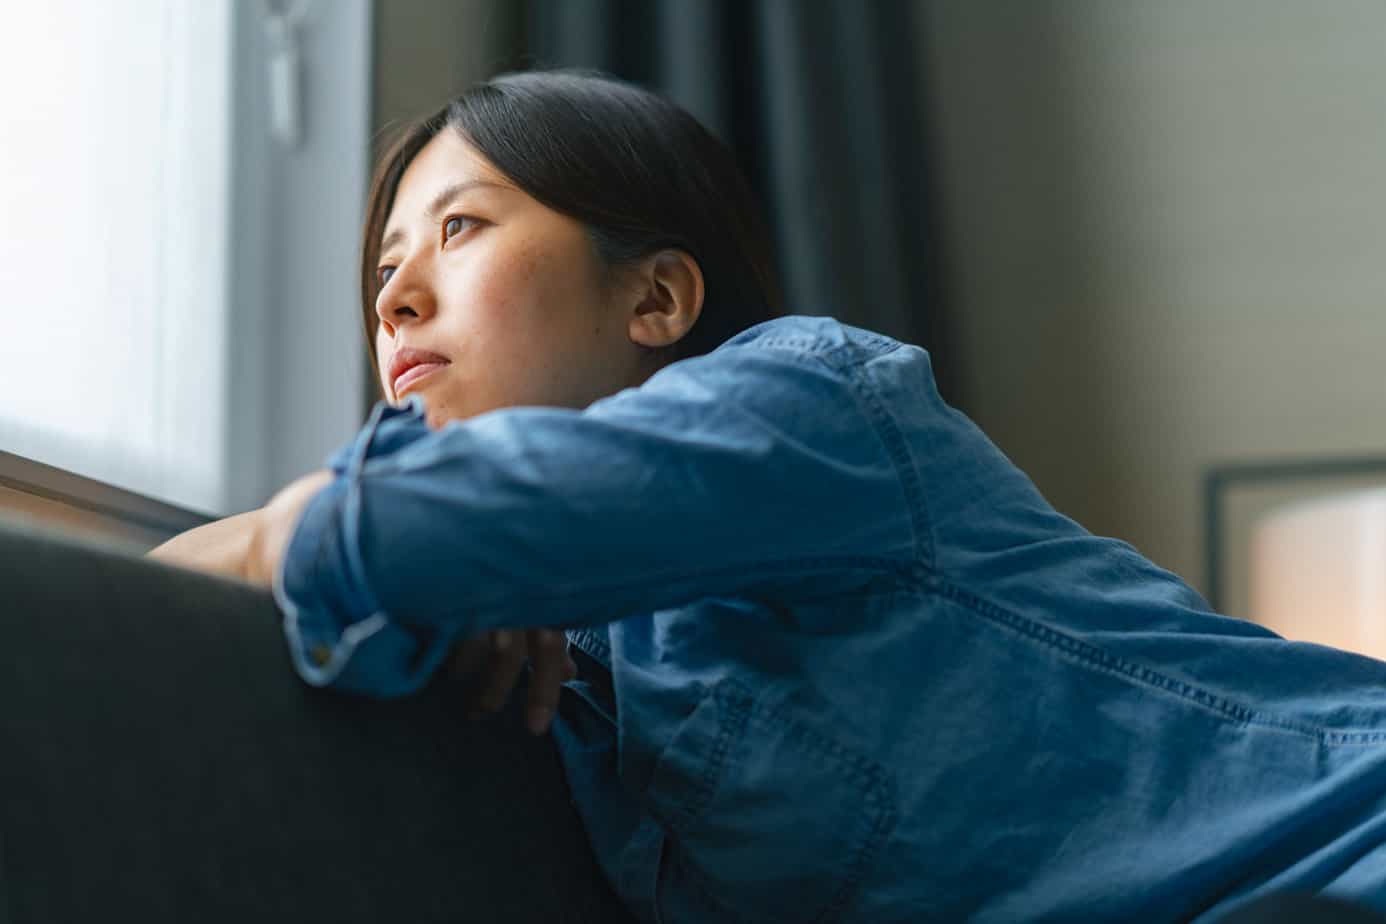 woman struggling with alcohol cravings looking out the window